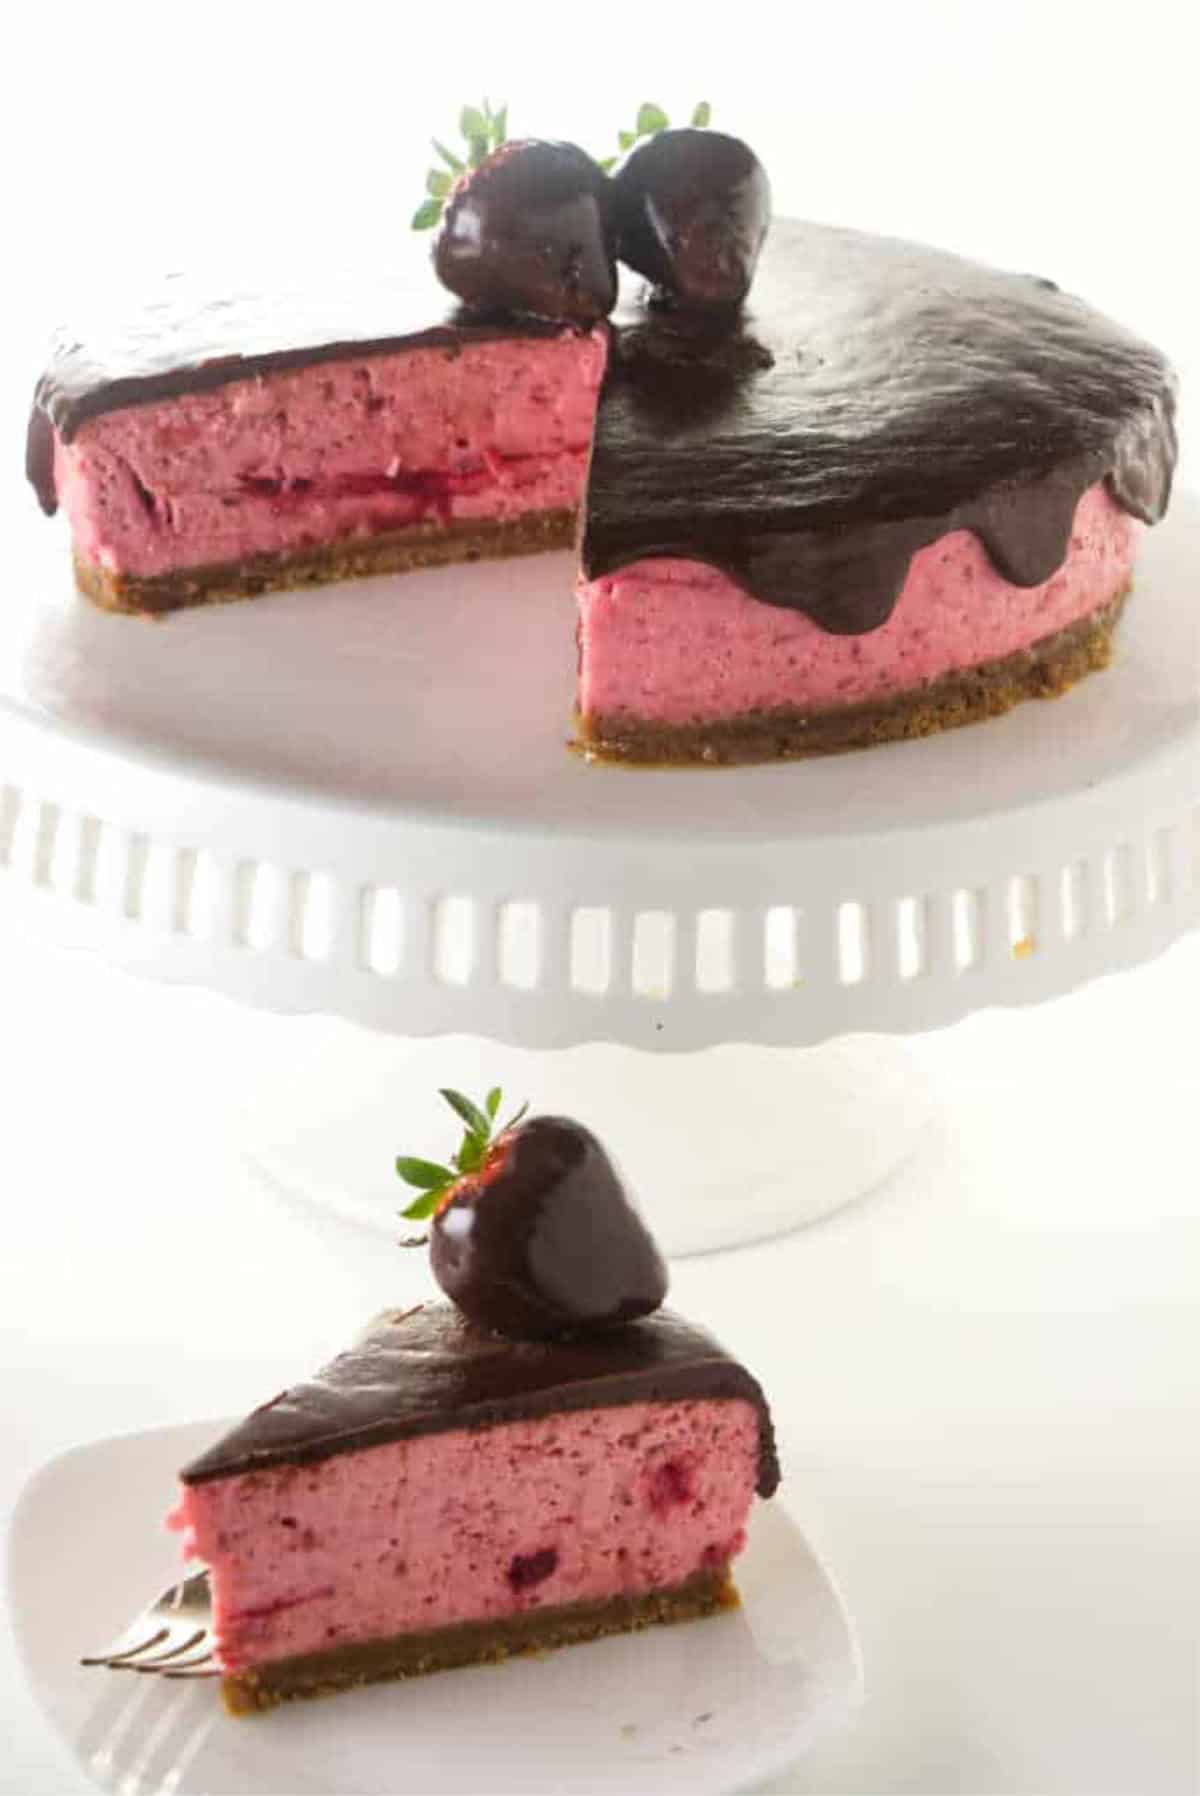 slice of strawberry cheesecake covered with chocolate ganache and a chocolate dipped strawberry.